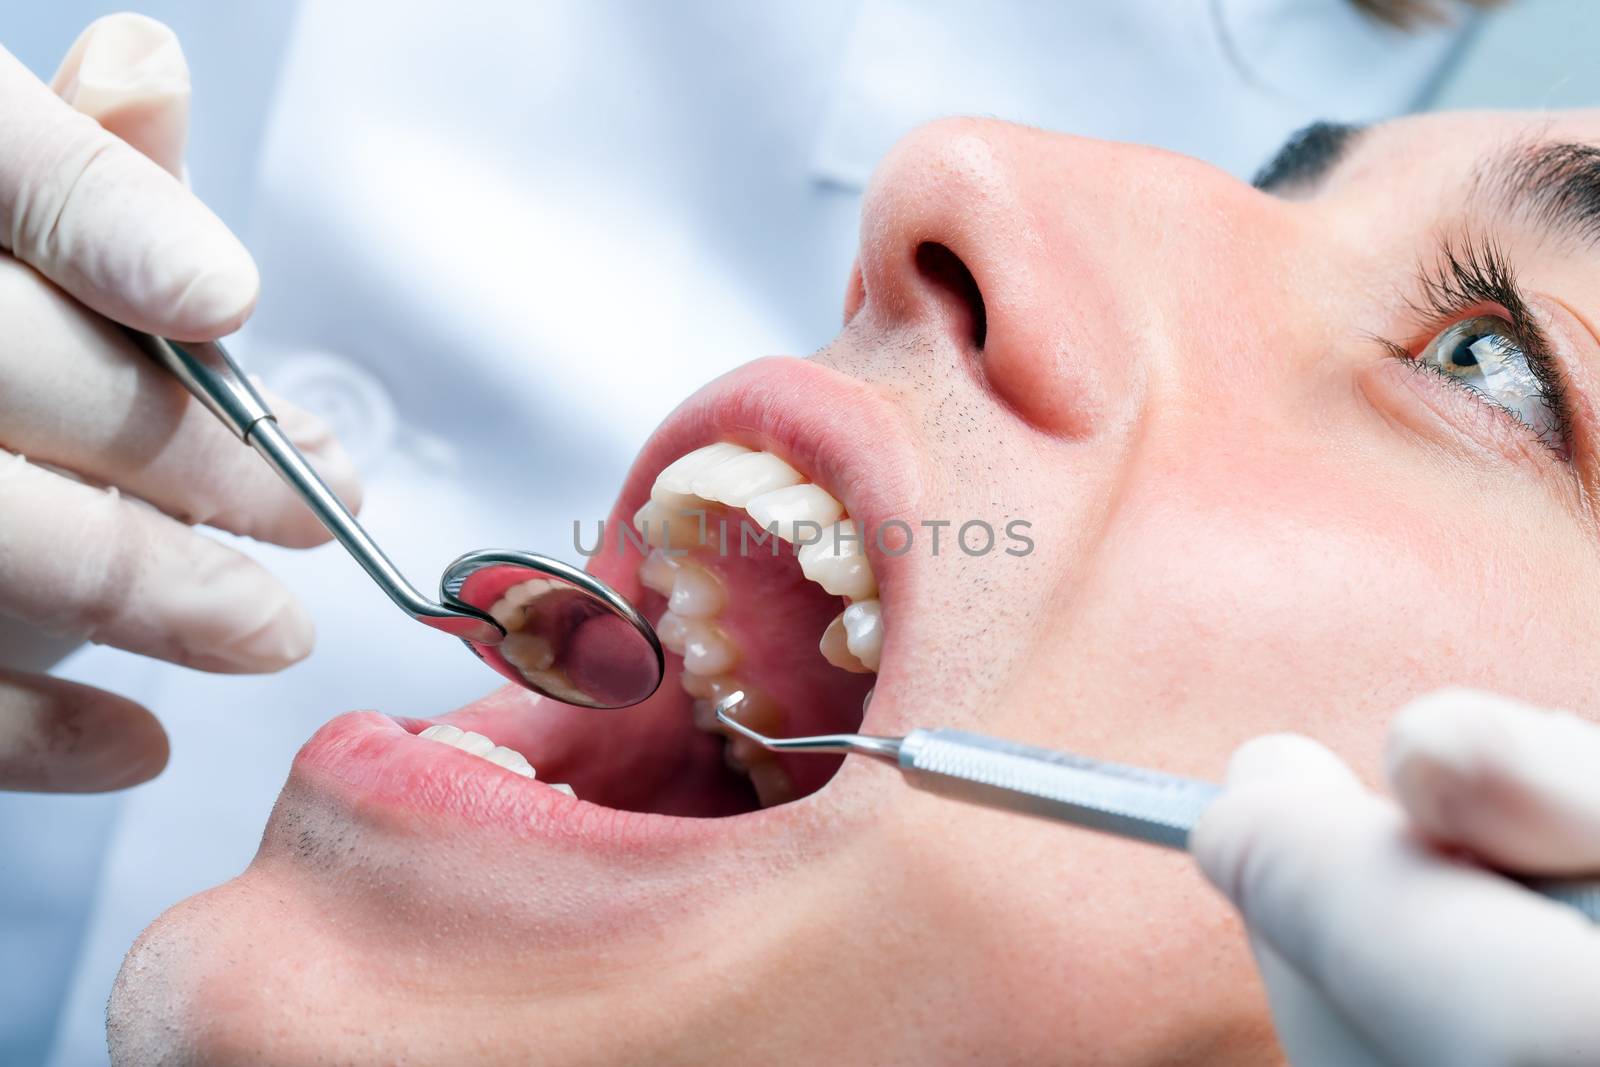 Extreme close up of Young man having dental checkup. Side view of open mouth with mouth mirror and dental hatchet.